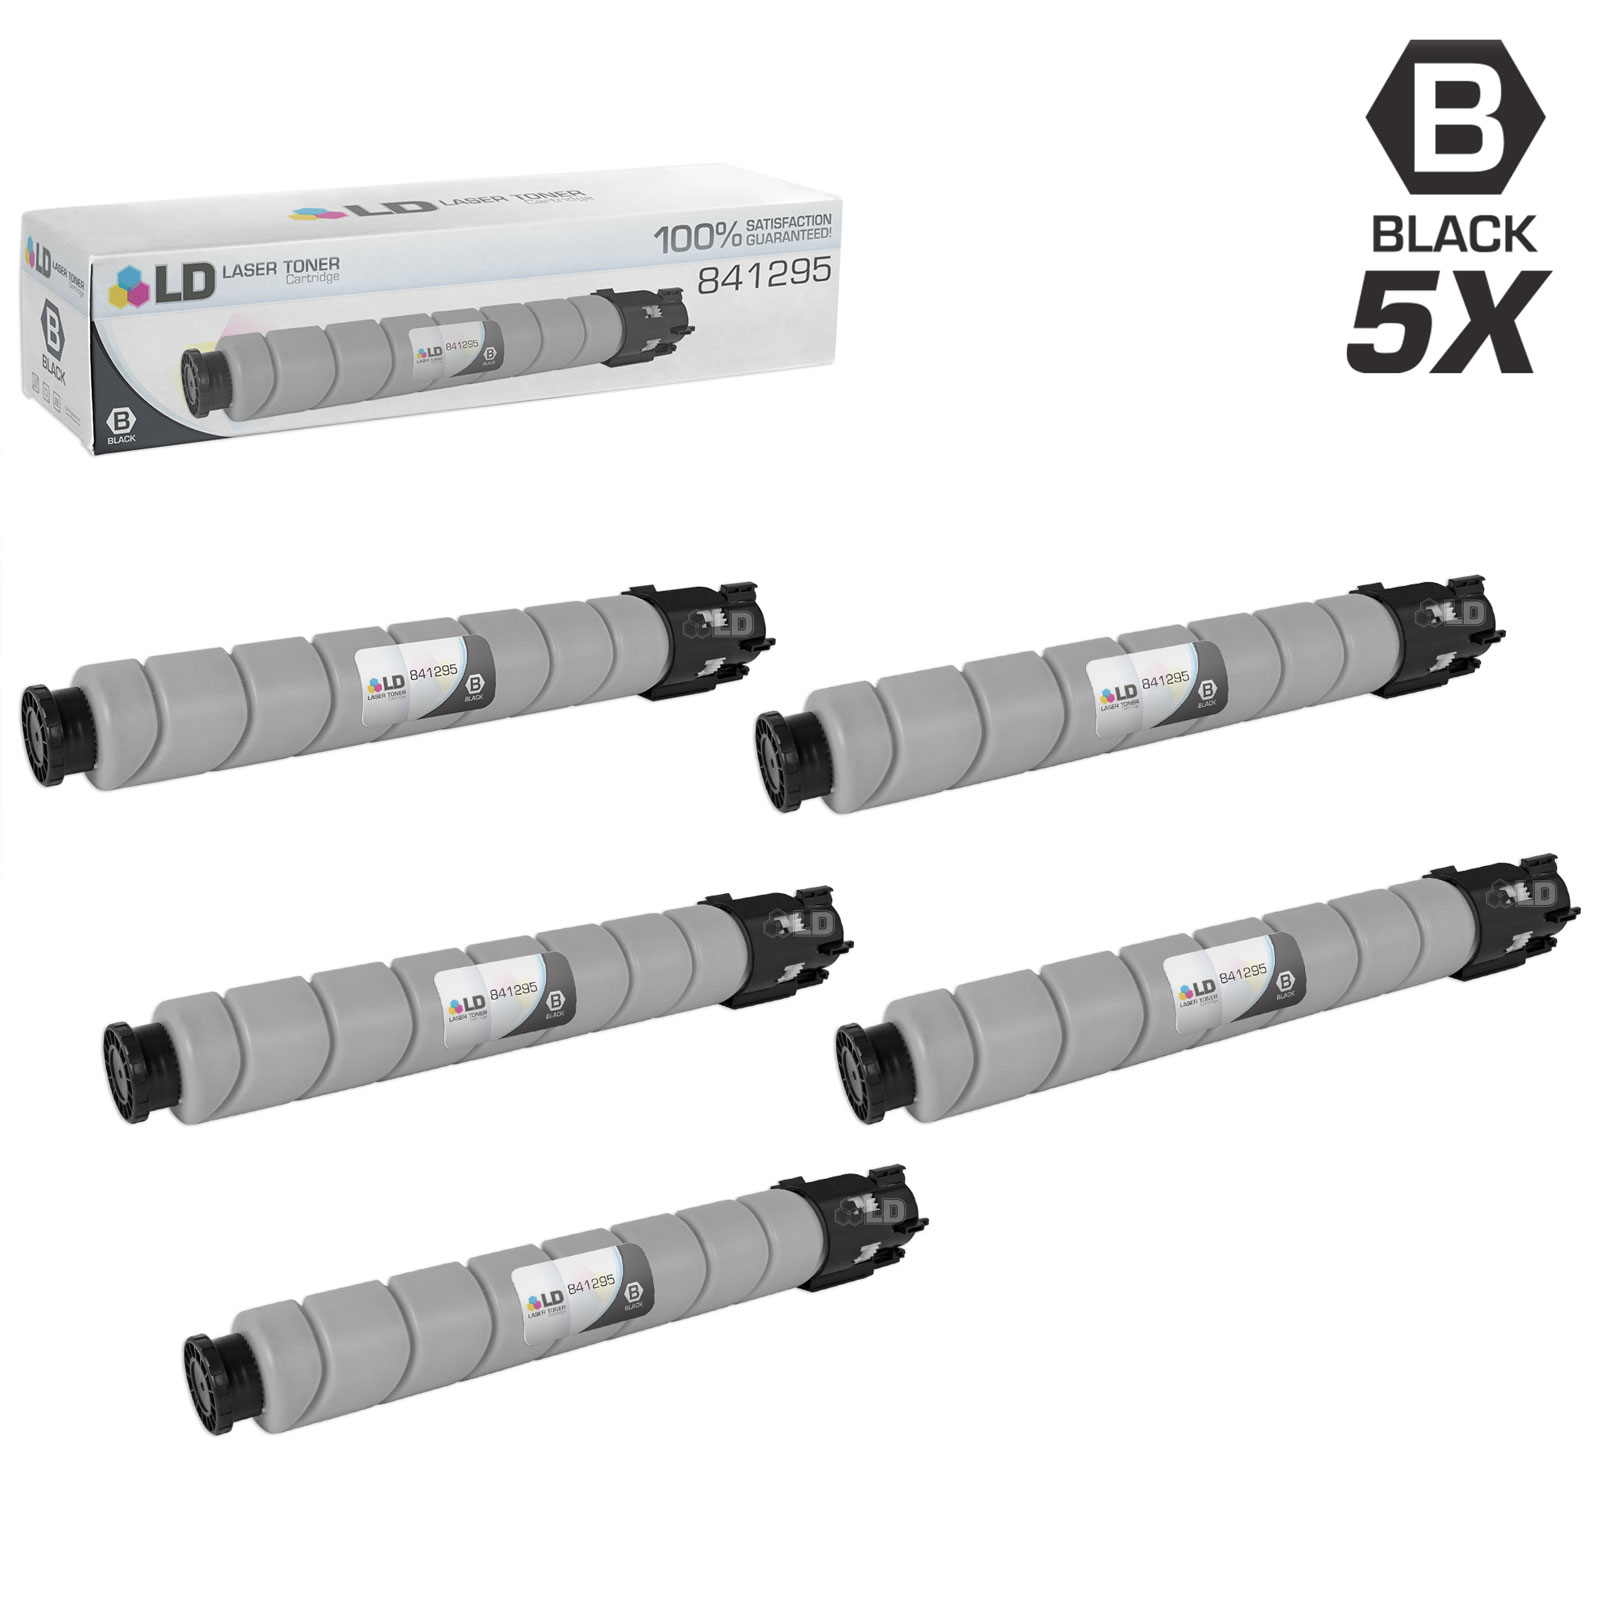 Compatible Replacements for Ricoh 841295 (841724) 5PK Black Laser Toner Cartridges for use in Ricoh Aficio, Lanier, and Savin s - image 1 of 1